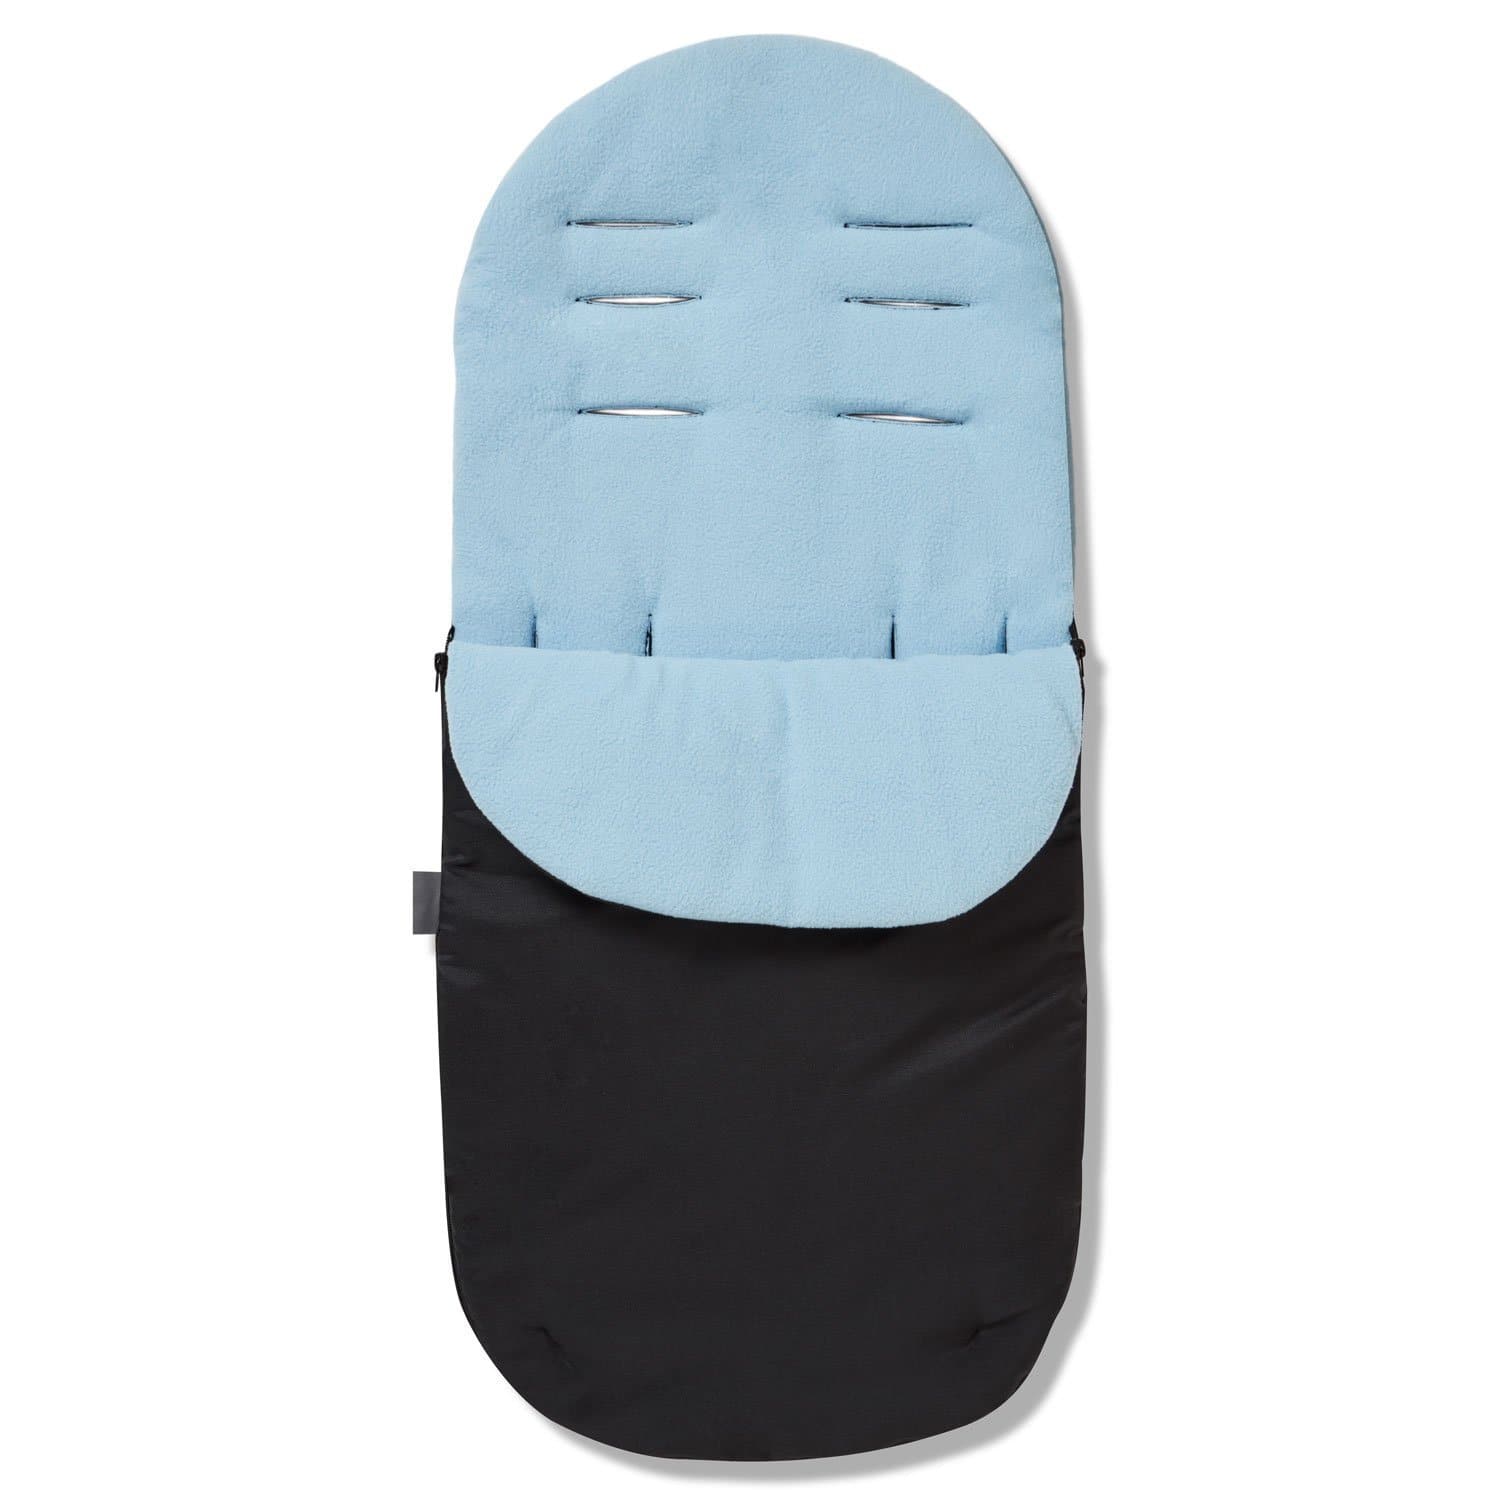 Footmuff / Cosy Toes Compatible with Formula - Light Blue / Fits All Models | For Your Little One